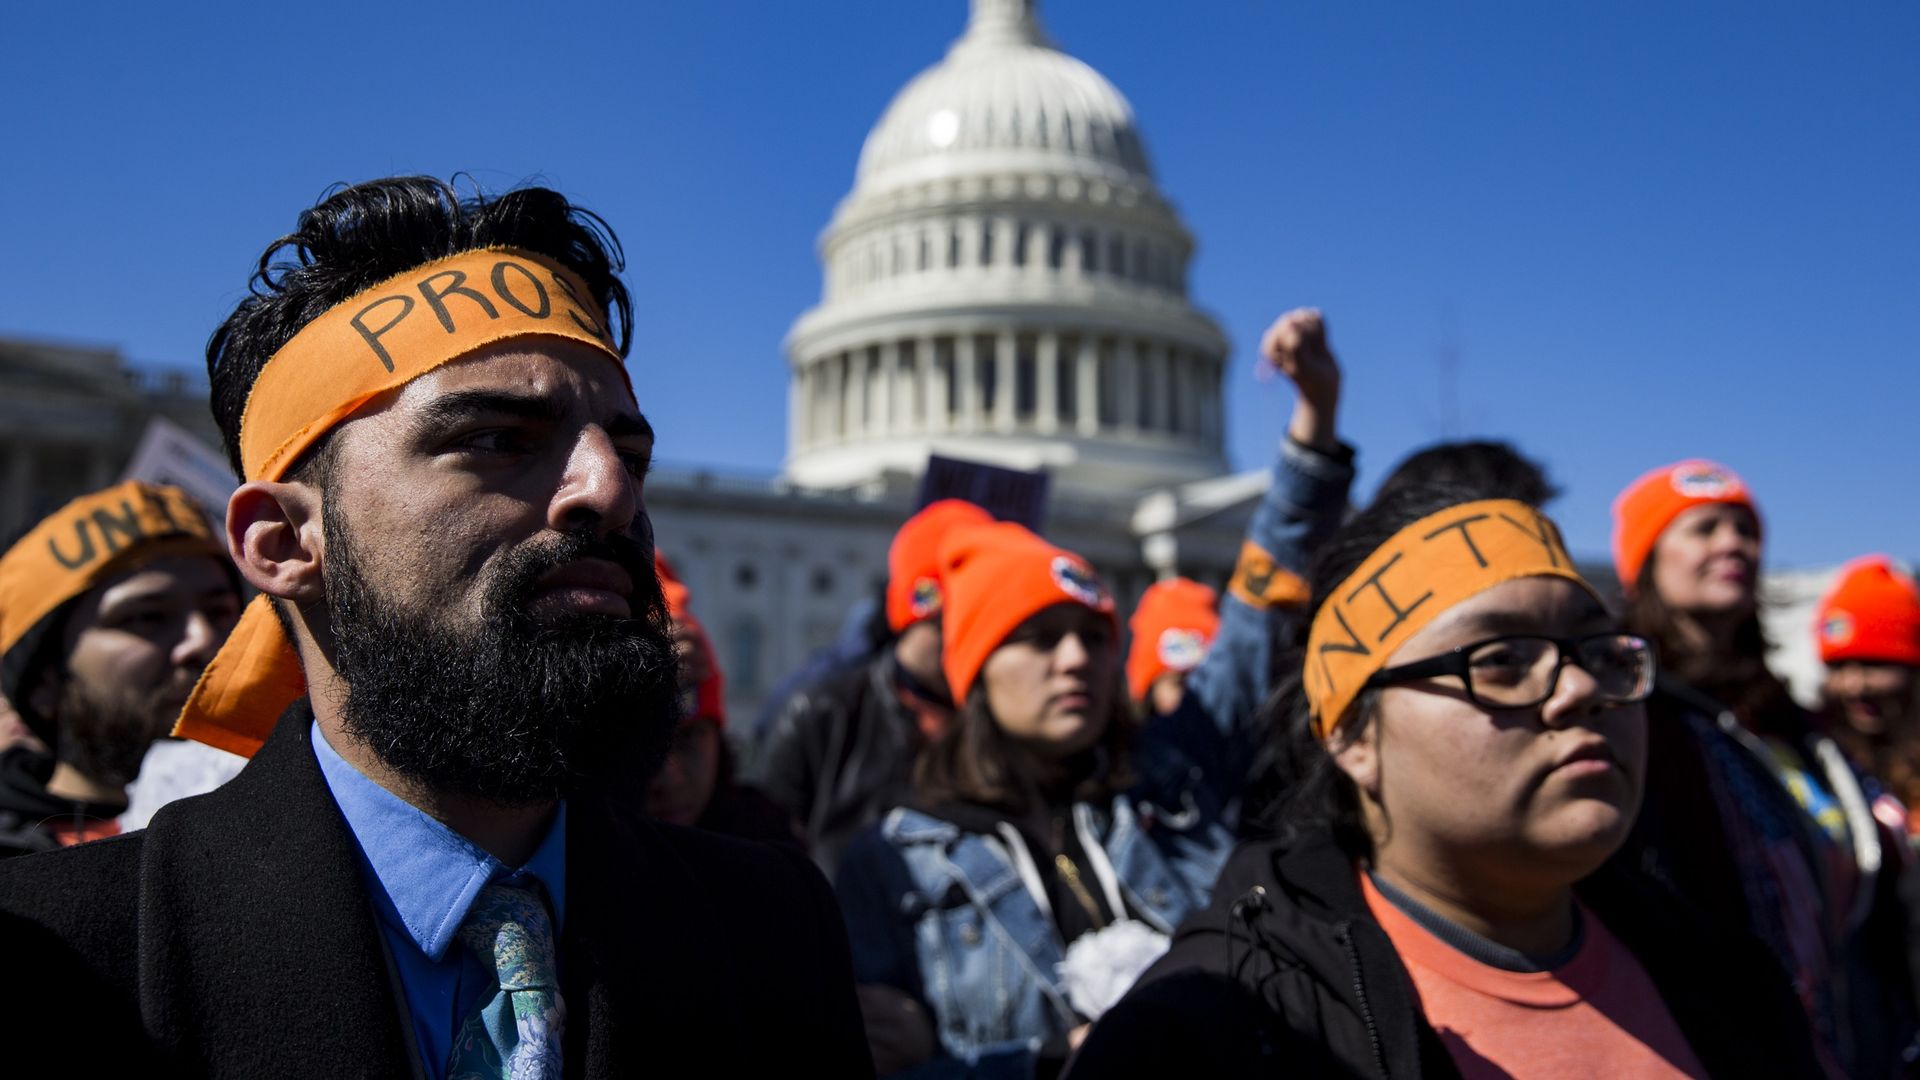 DACA protestors wearing orange headbands out front of the U.S. Capitol building